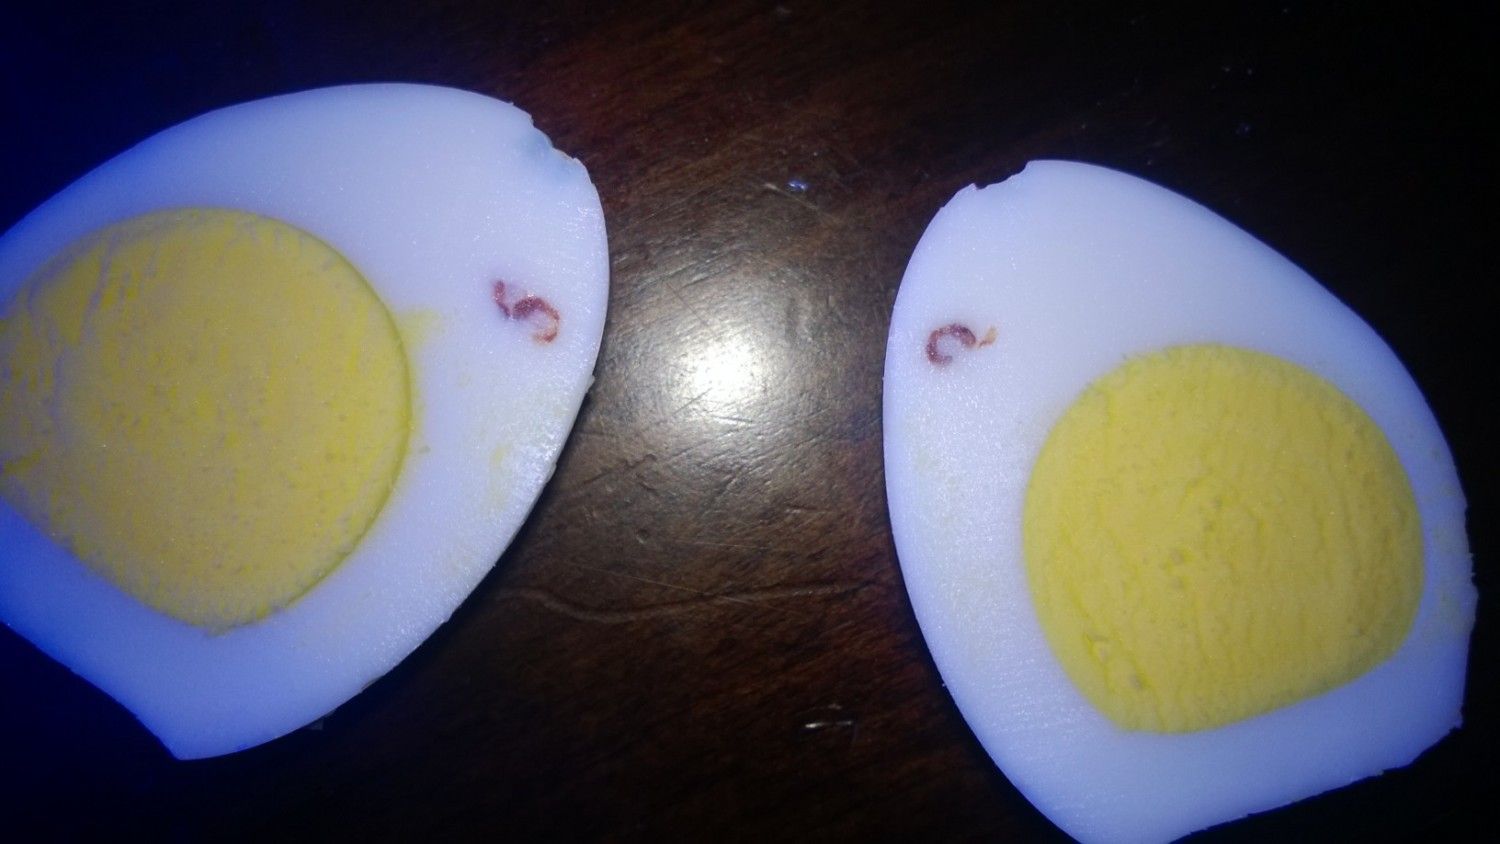 Worm in Egg?